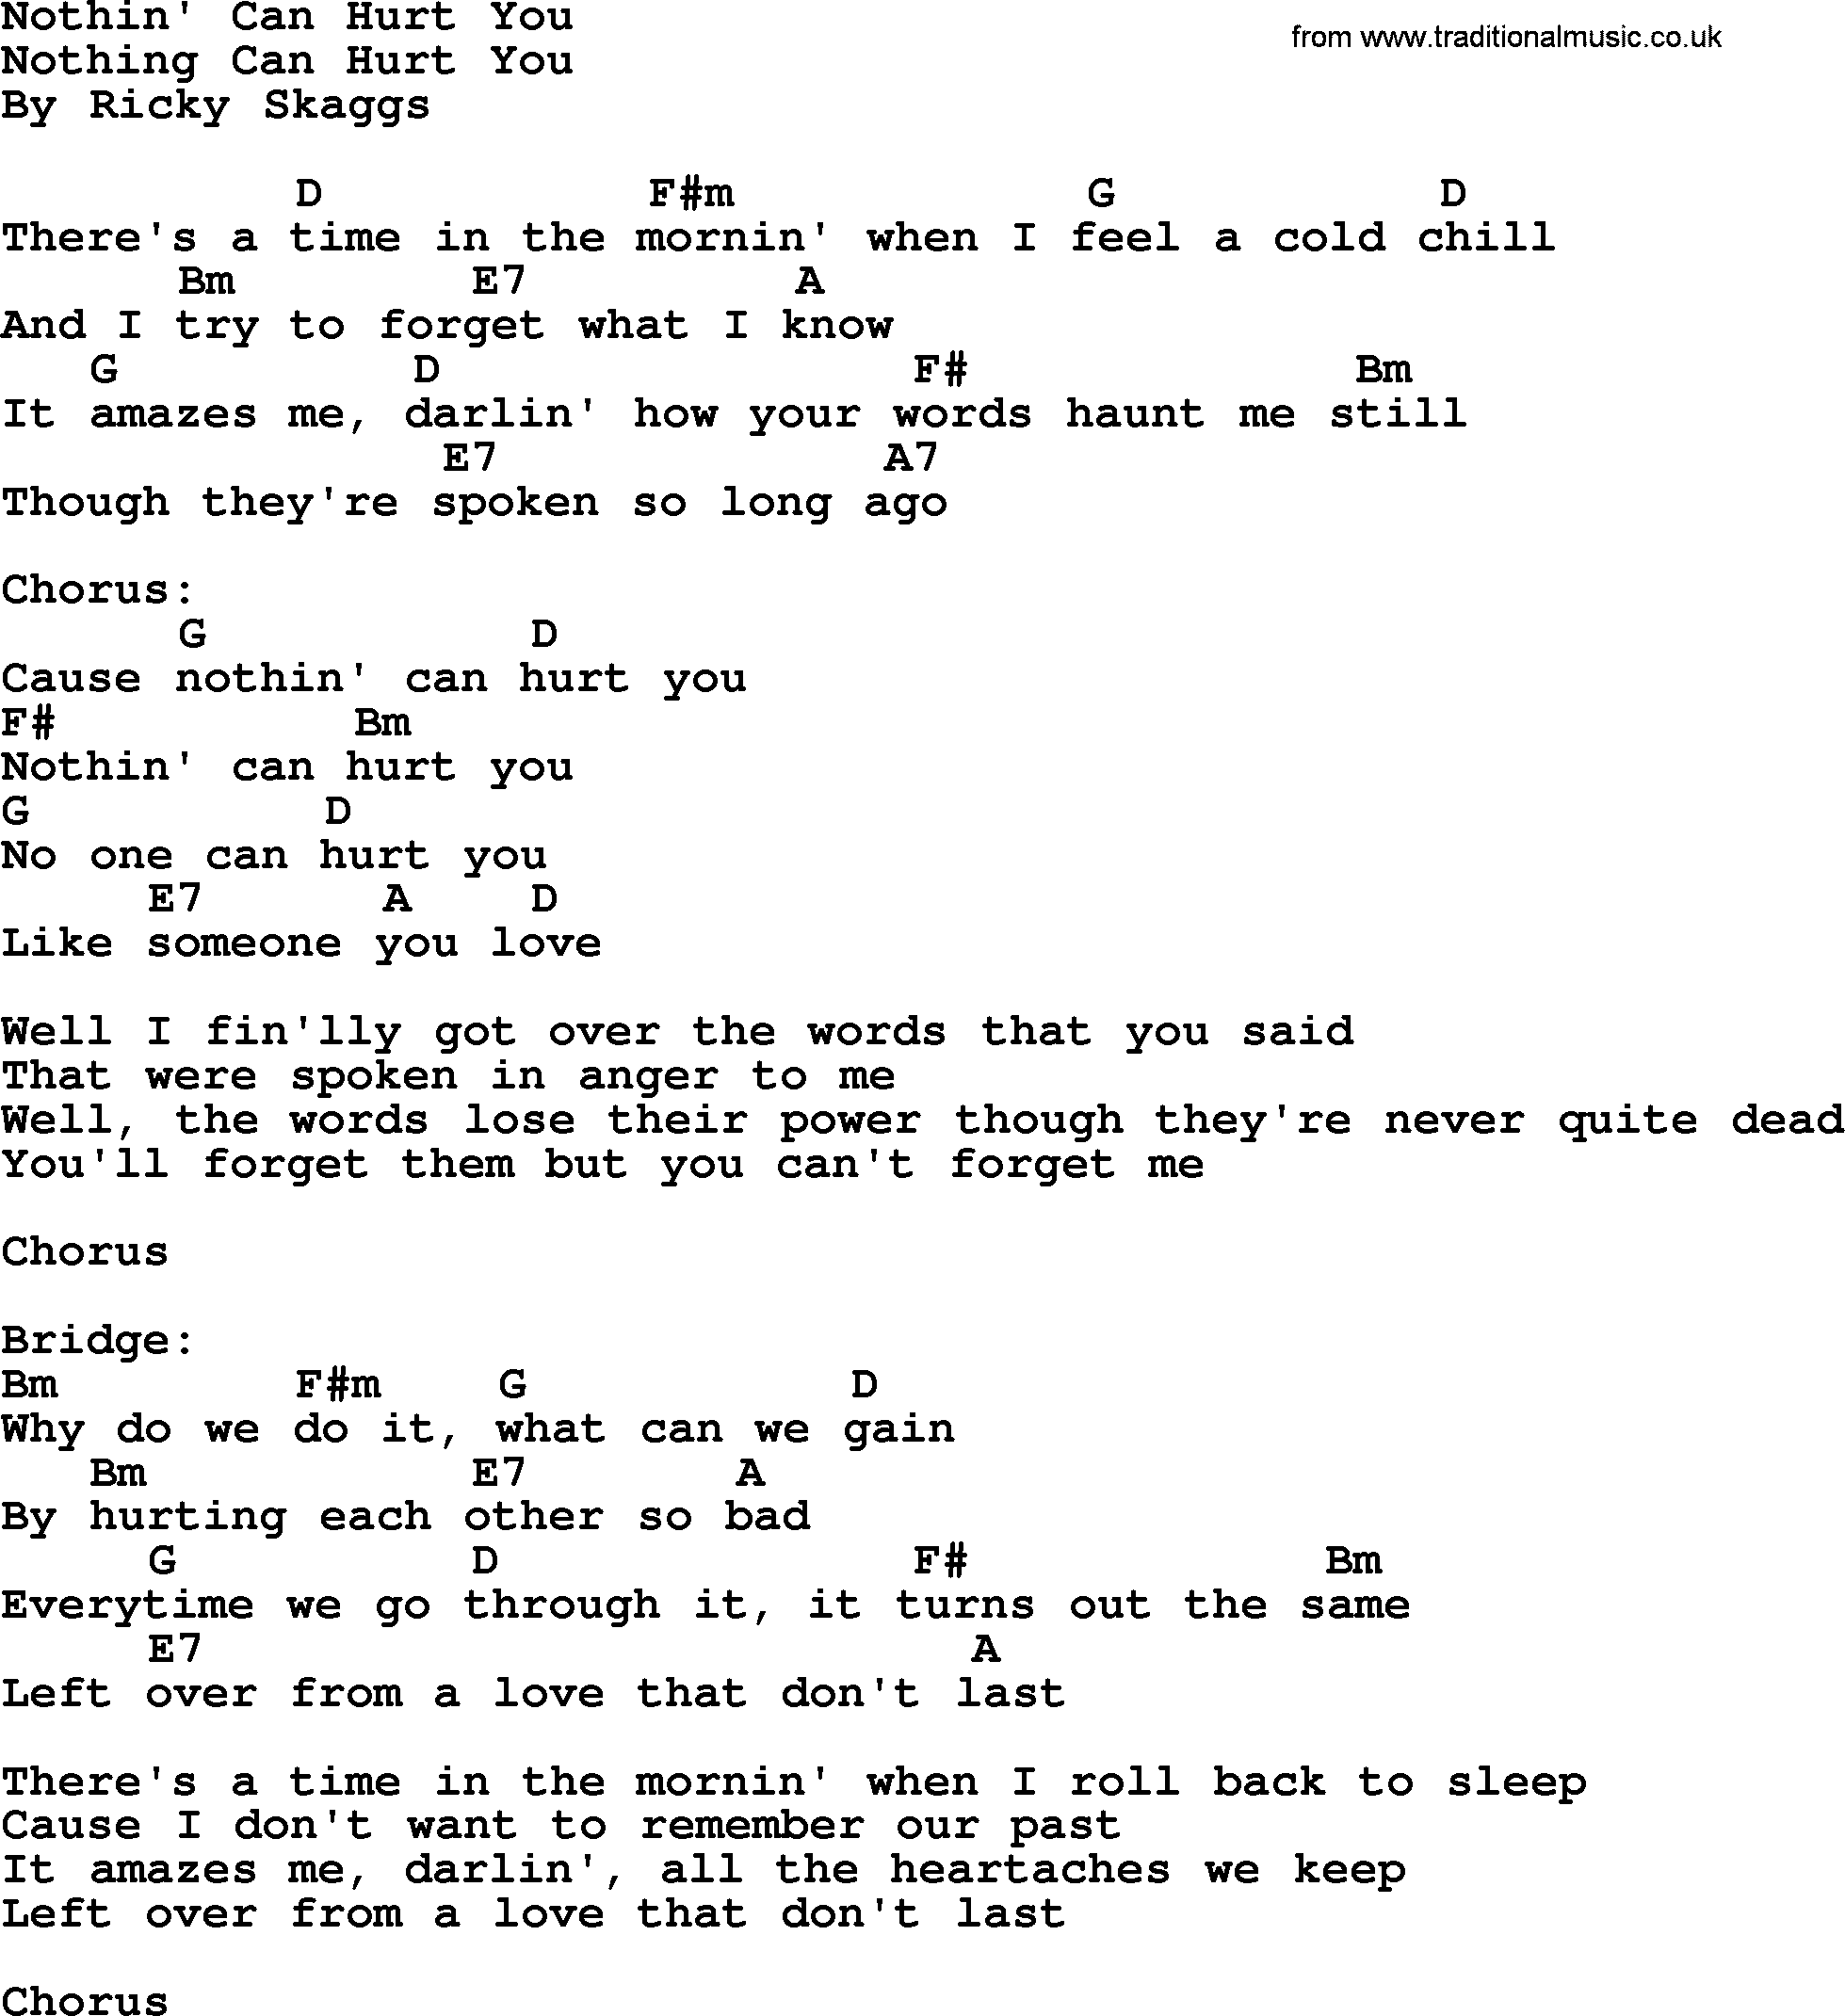 Bluegrass song: Nothin' Can Hurt You, lyrics and chords